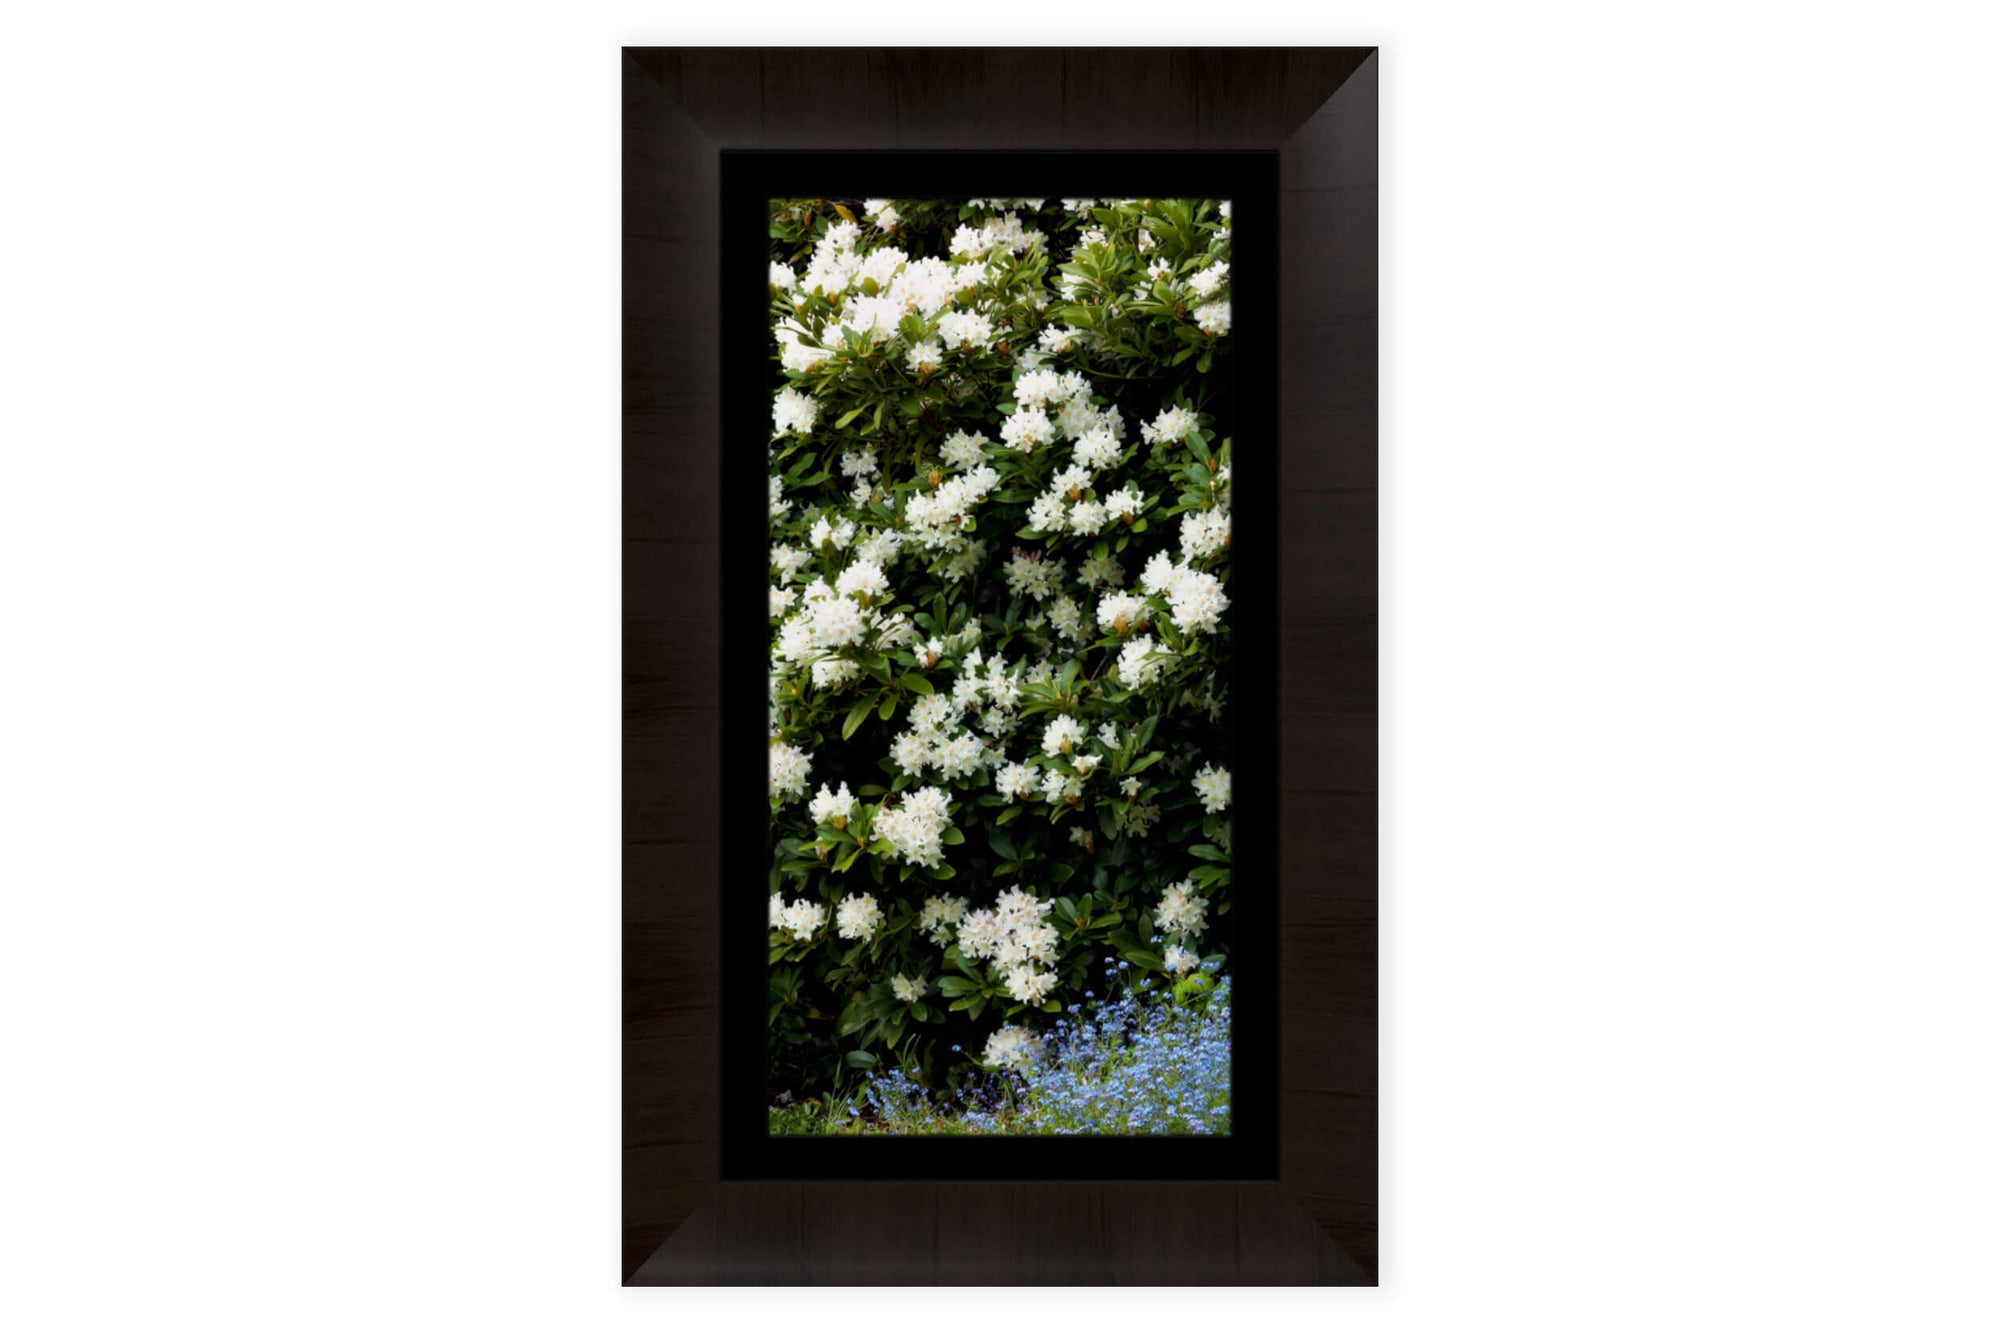 This piece of framed Seattle art shows a Kubota Garden picture.